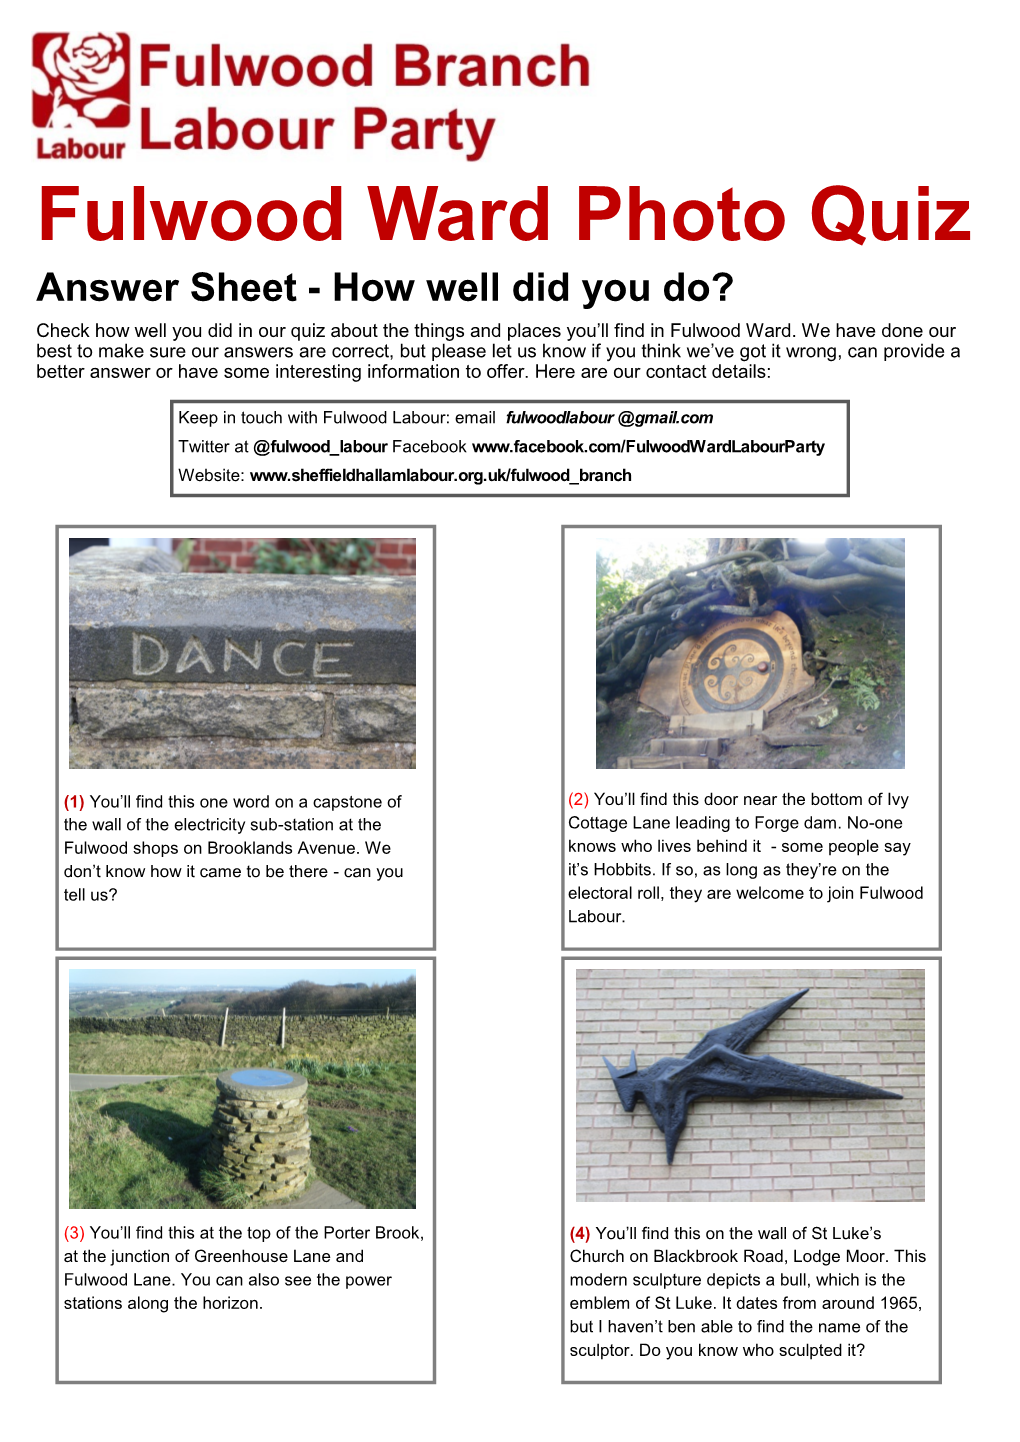 Fulwood Ward Photo Quiz Answer Sheet - How Well Did You Do? Check How Well You Did in Our Quiz About the Things and Places You’Ll Find in Fulwood Ward